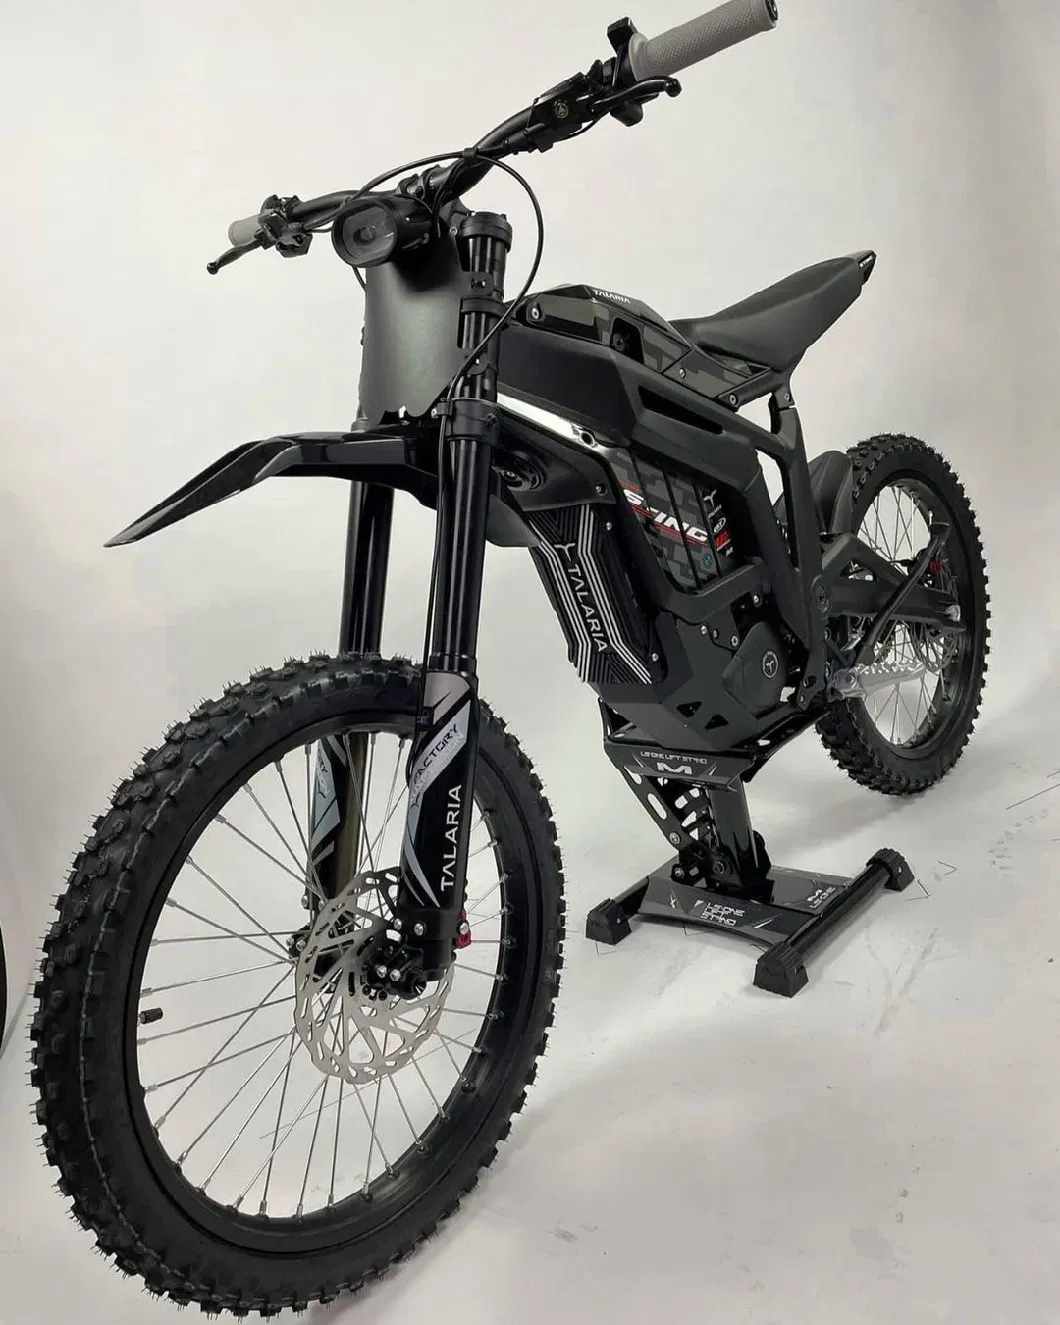 Talaria Sting 6000W Ebike off Road Electric Bicycle for Adult